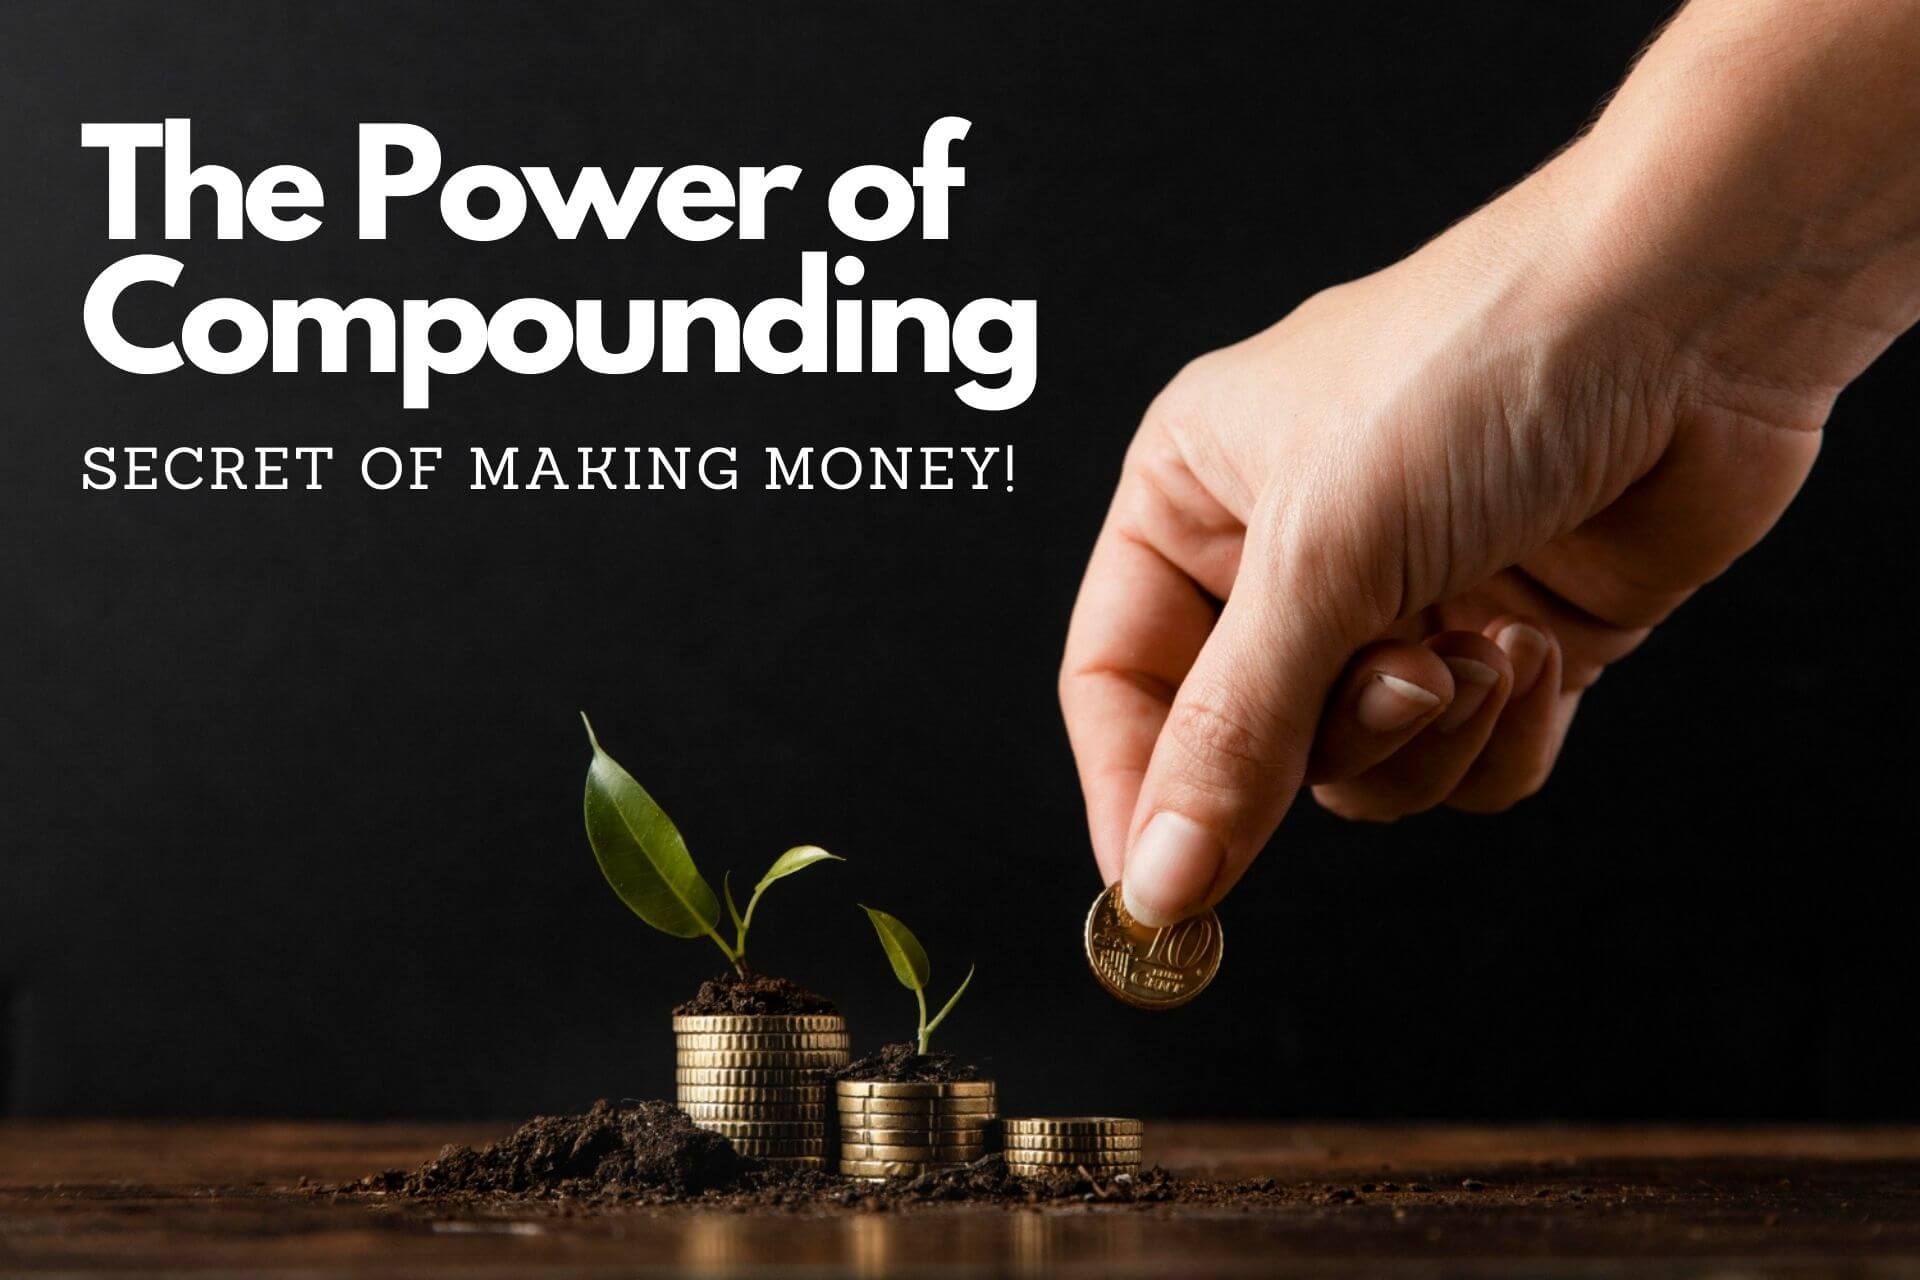 The Power of Compounding: How to Make Time Work for Your Investments